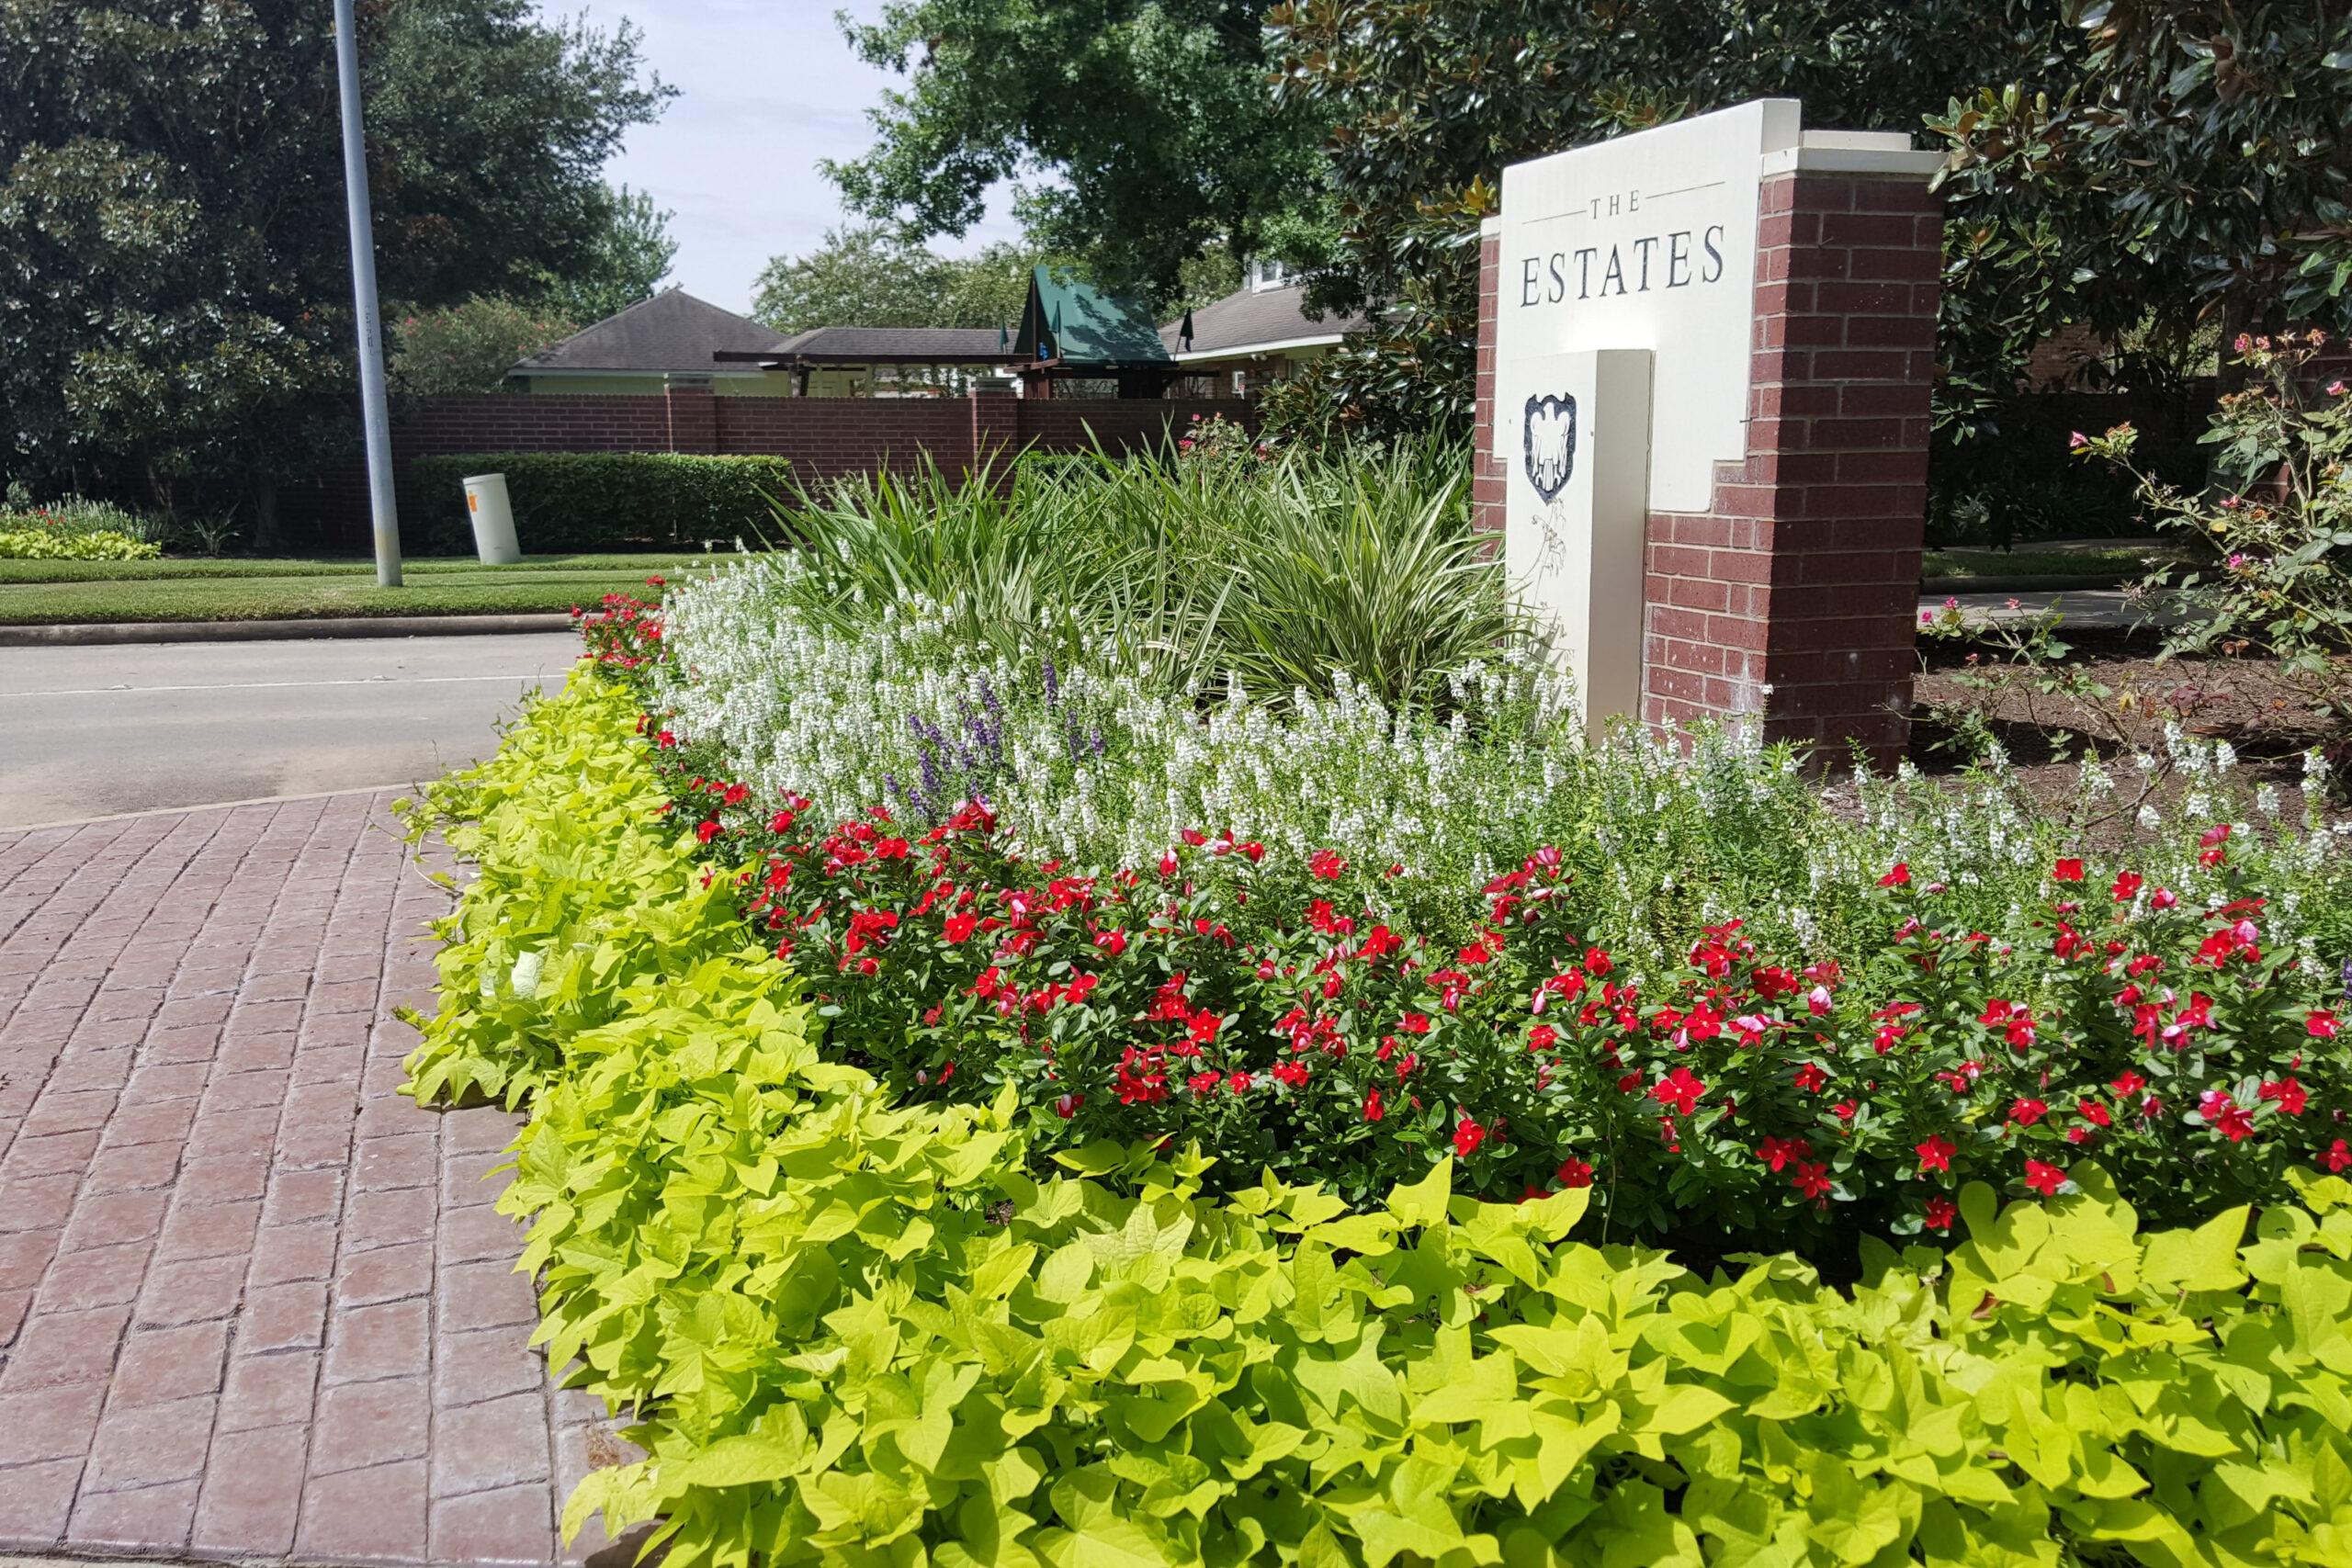 Our commercial landscapers have years of experience maintaining, installing & designing commercial landscaping for businesses and property managers.